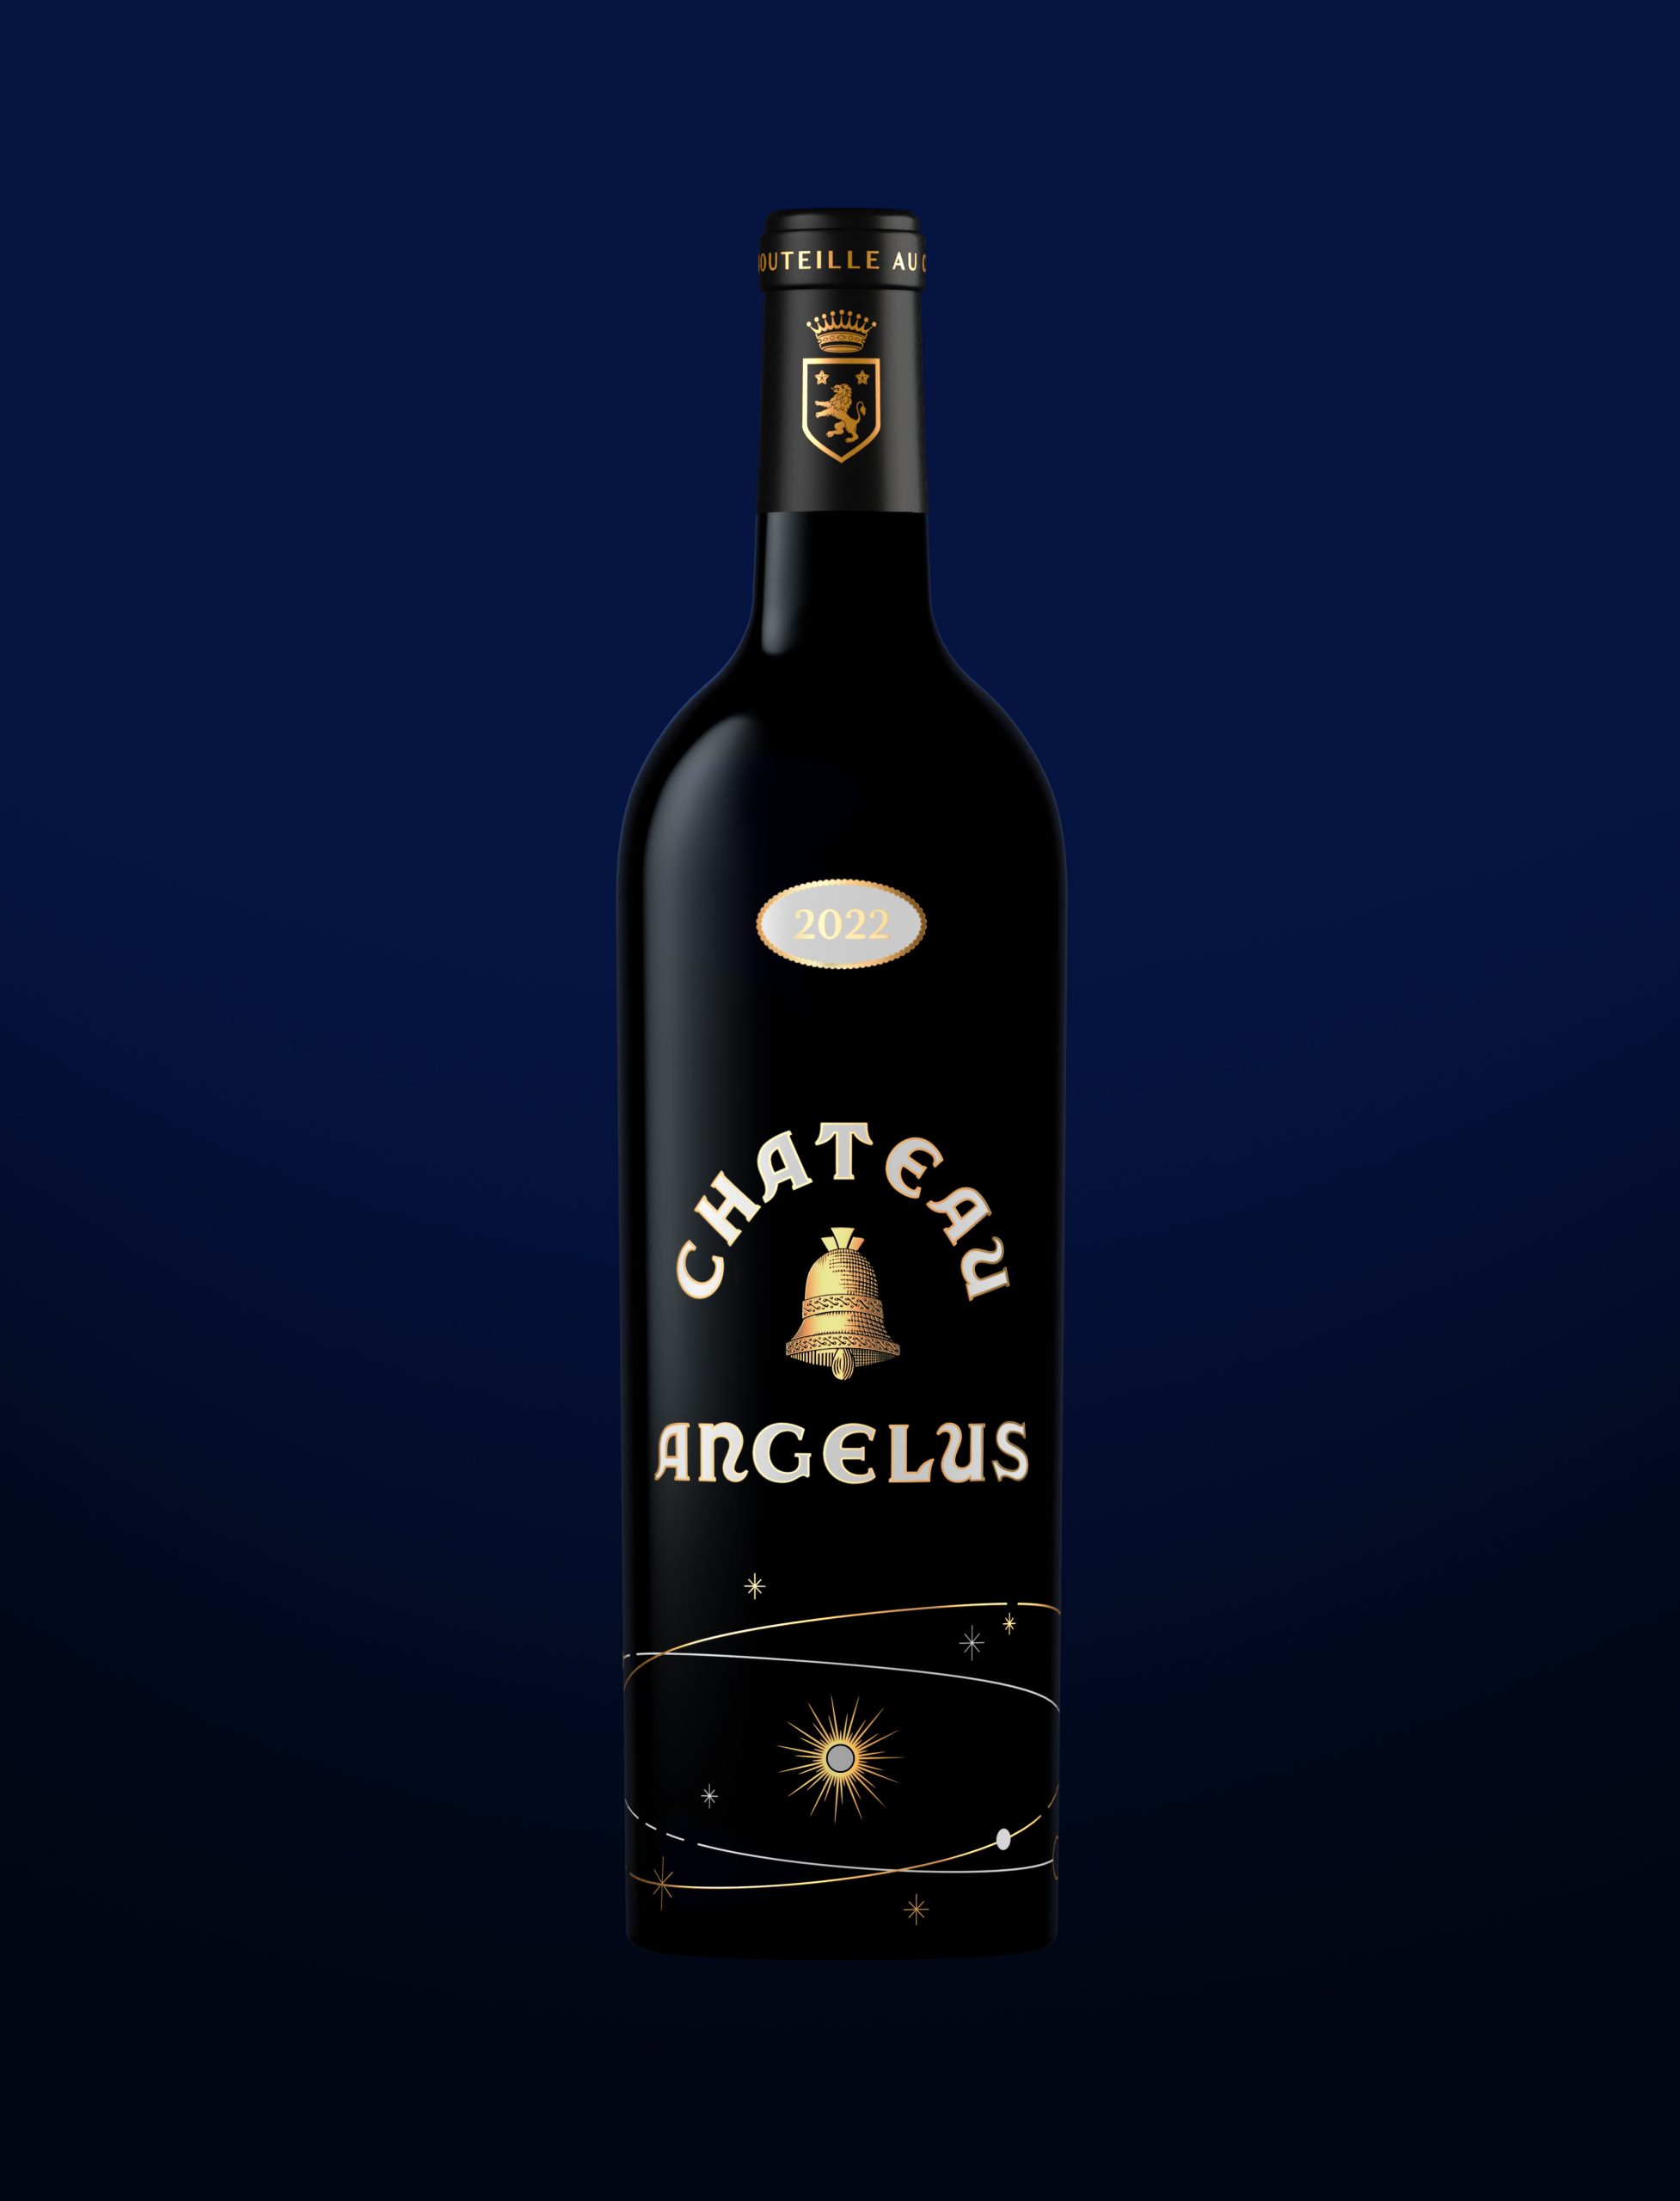 Château Angelus unveils special bottle design for the 'majestic 